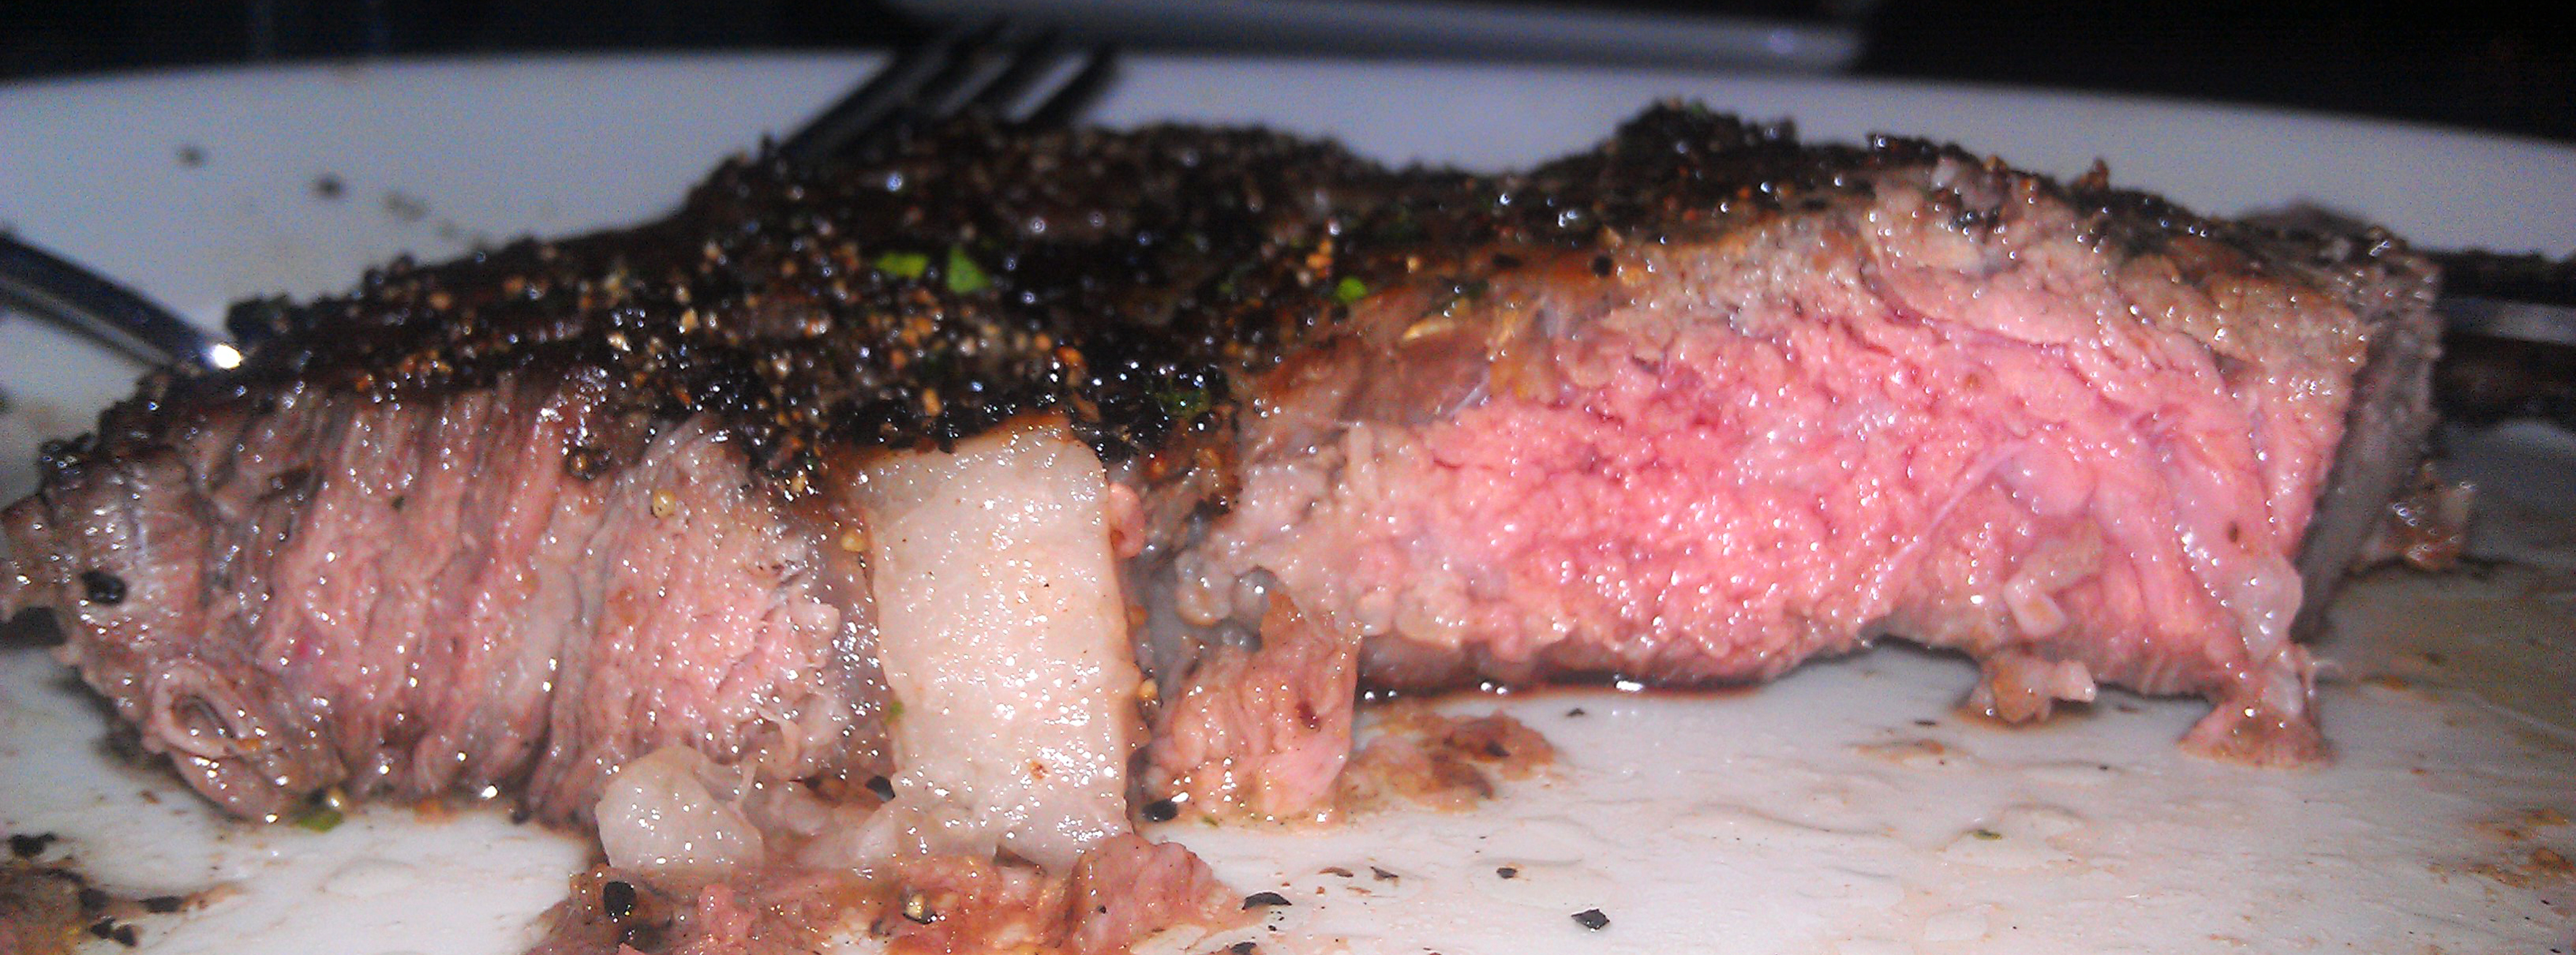 cross section of a rib eye: left side is the fat cap, right side is the "roast" side, as I like to call it.